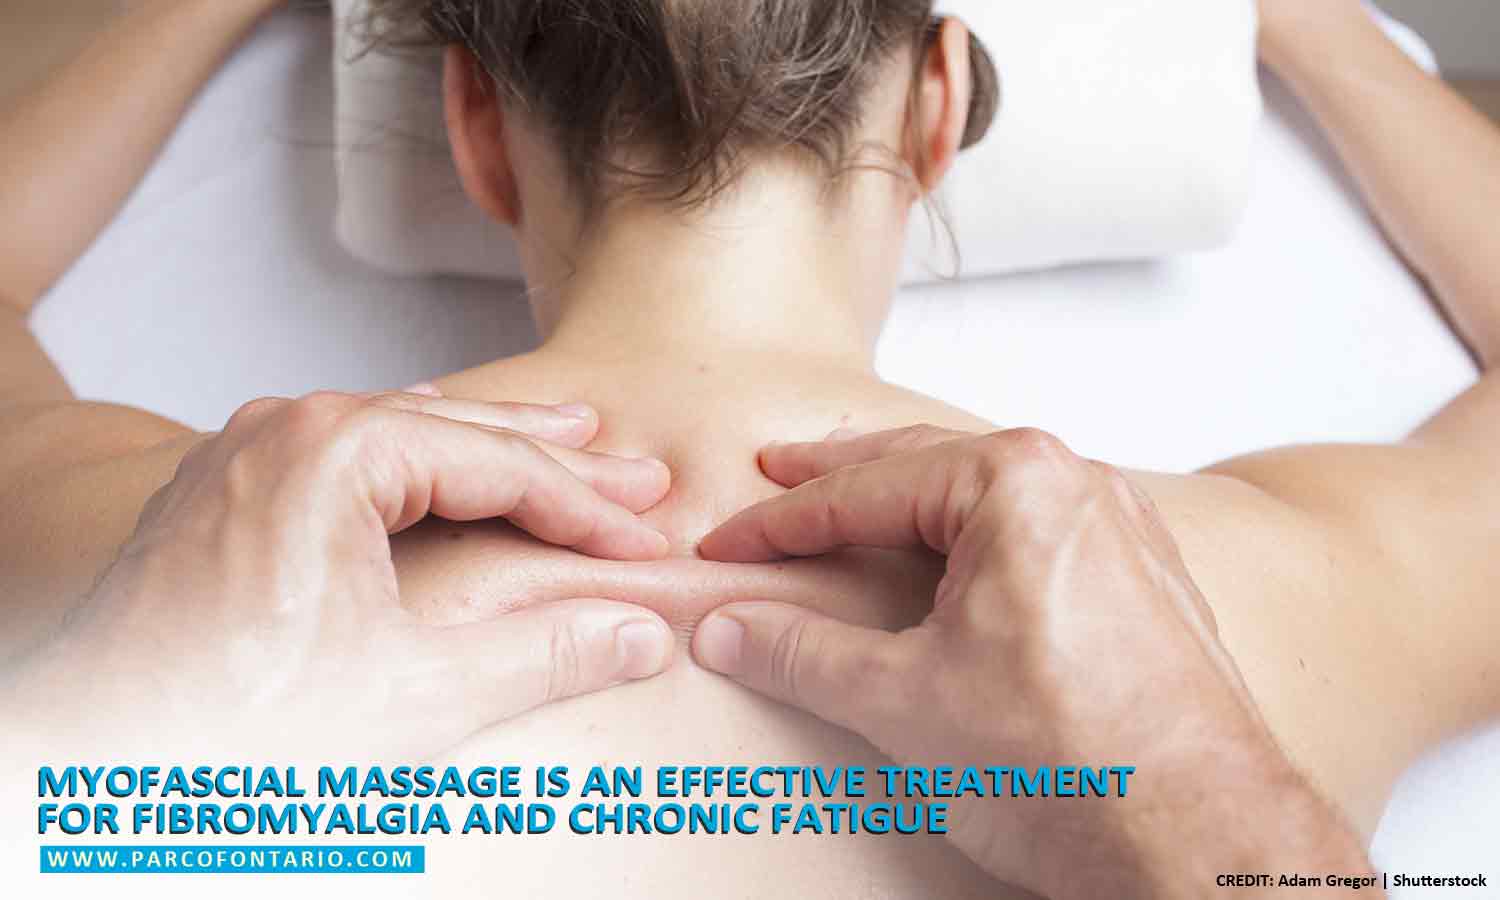 Massage for Back Pain Relief Near You